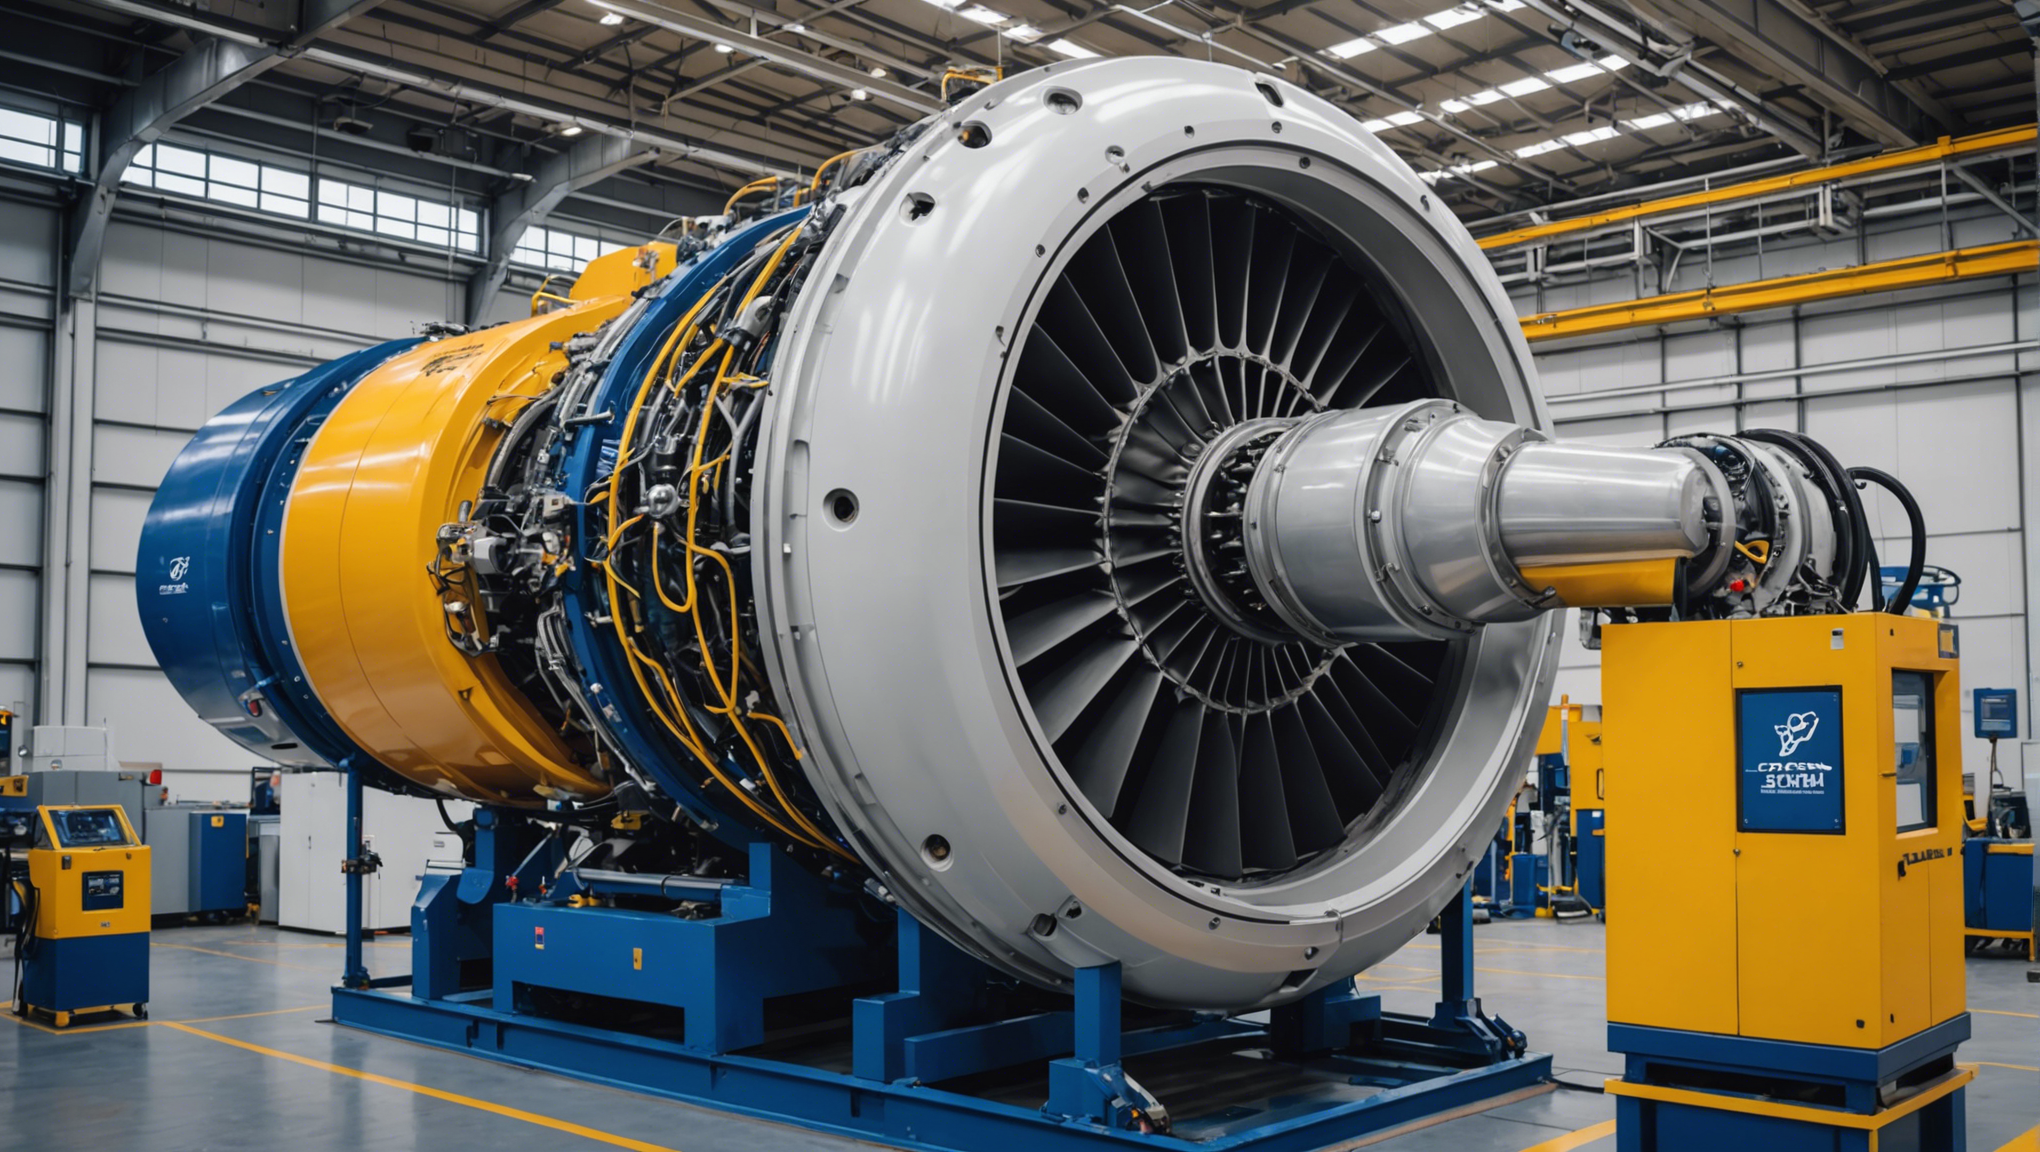 find out how safran invests in leap engine maintenance in brussels to ensure optimum performance and aircraft reliability.